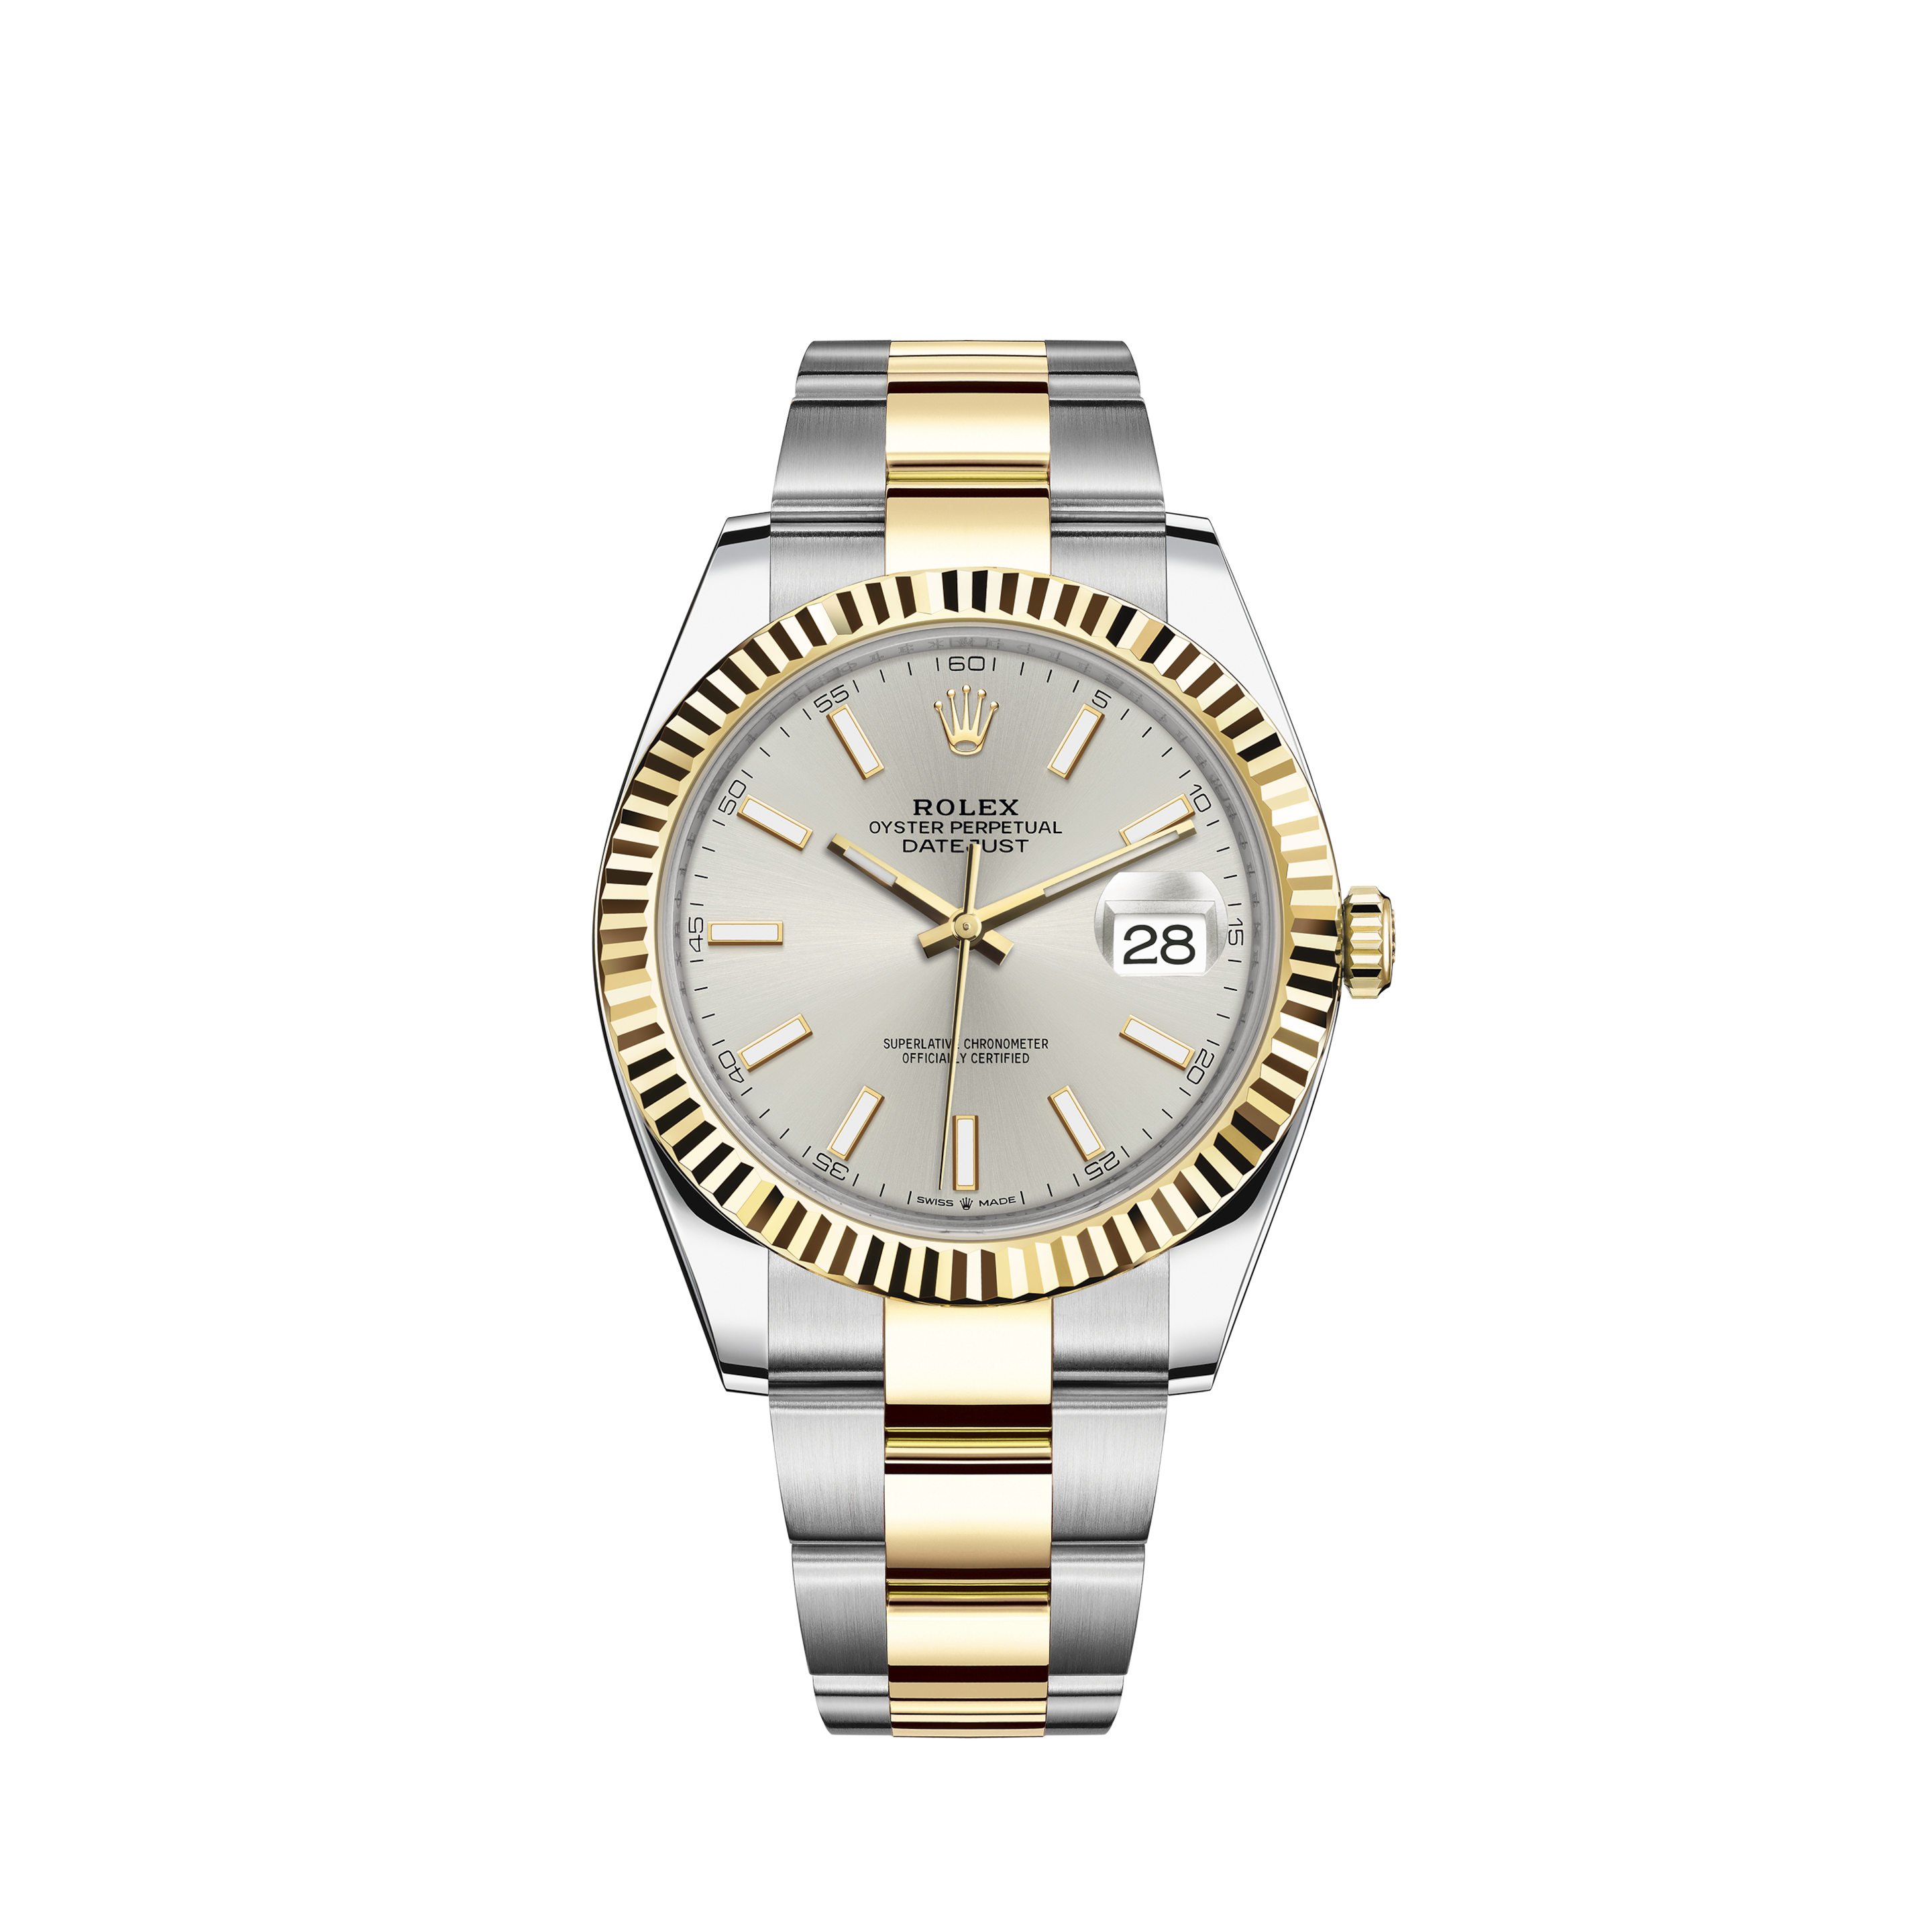 Rolex Datejust 31 31 mm Stainless Steel and Everose Gold 178241-0025 Ladies WatchRolex Datejust 31 31 mm Stainless Steel and Everose Gold 178241-0027 Ladies Watch